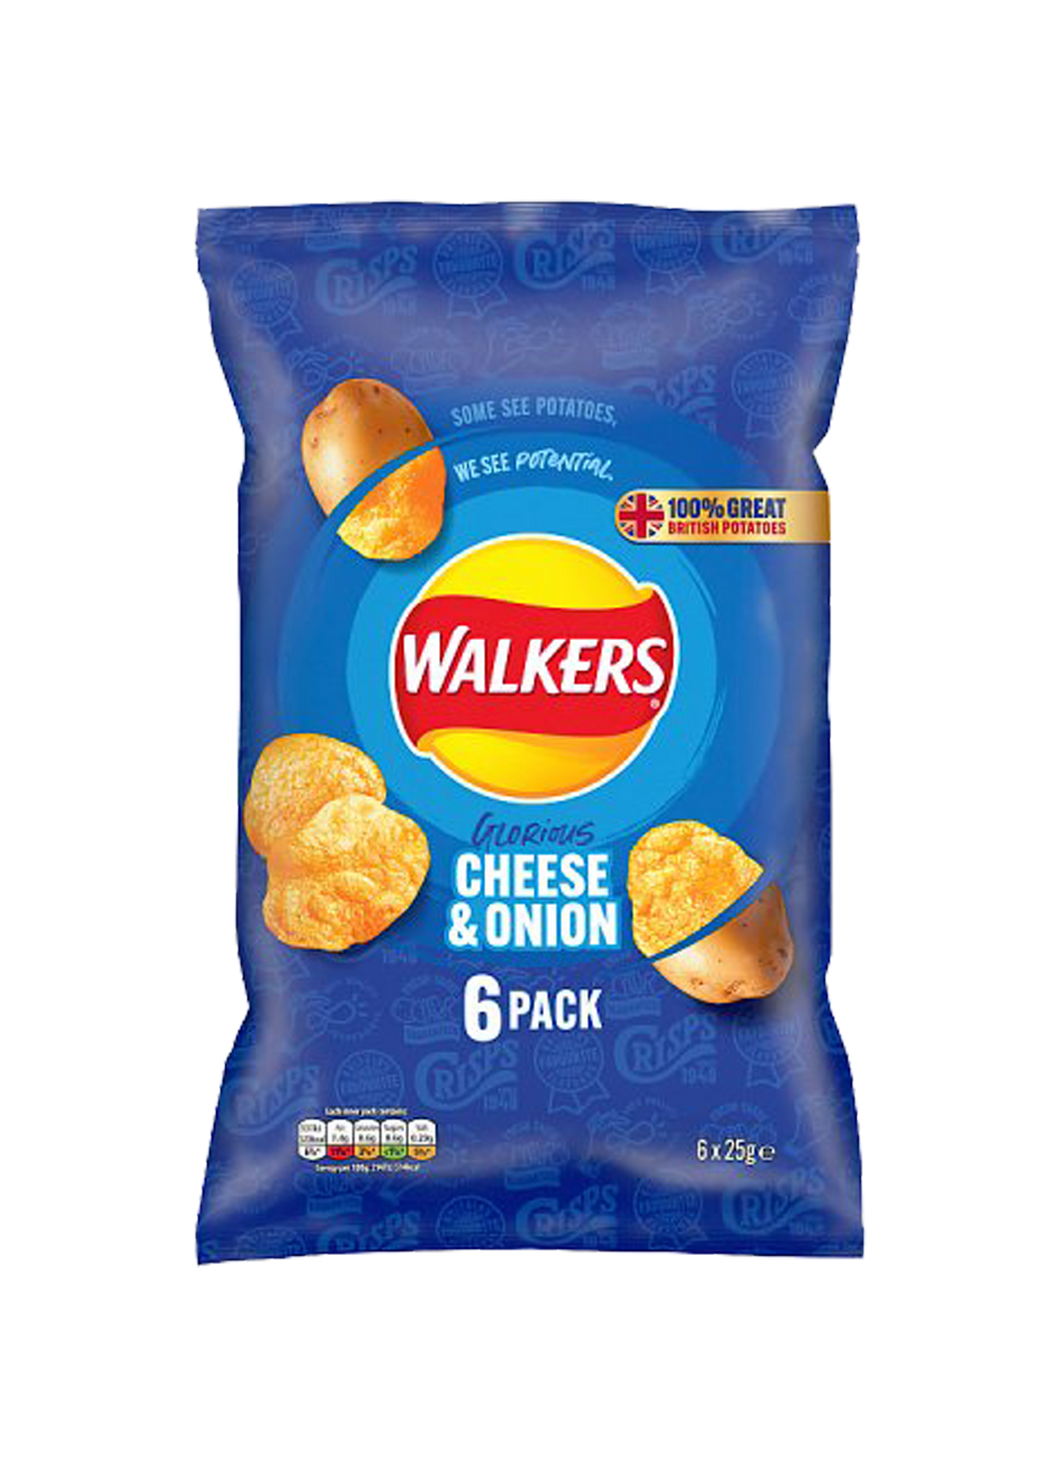 Walkers Cheese & Onion 6 Pack Crisps Chips 6 x 25g